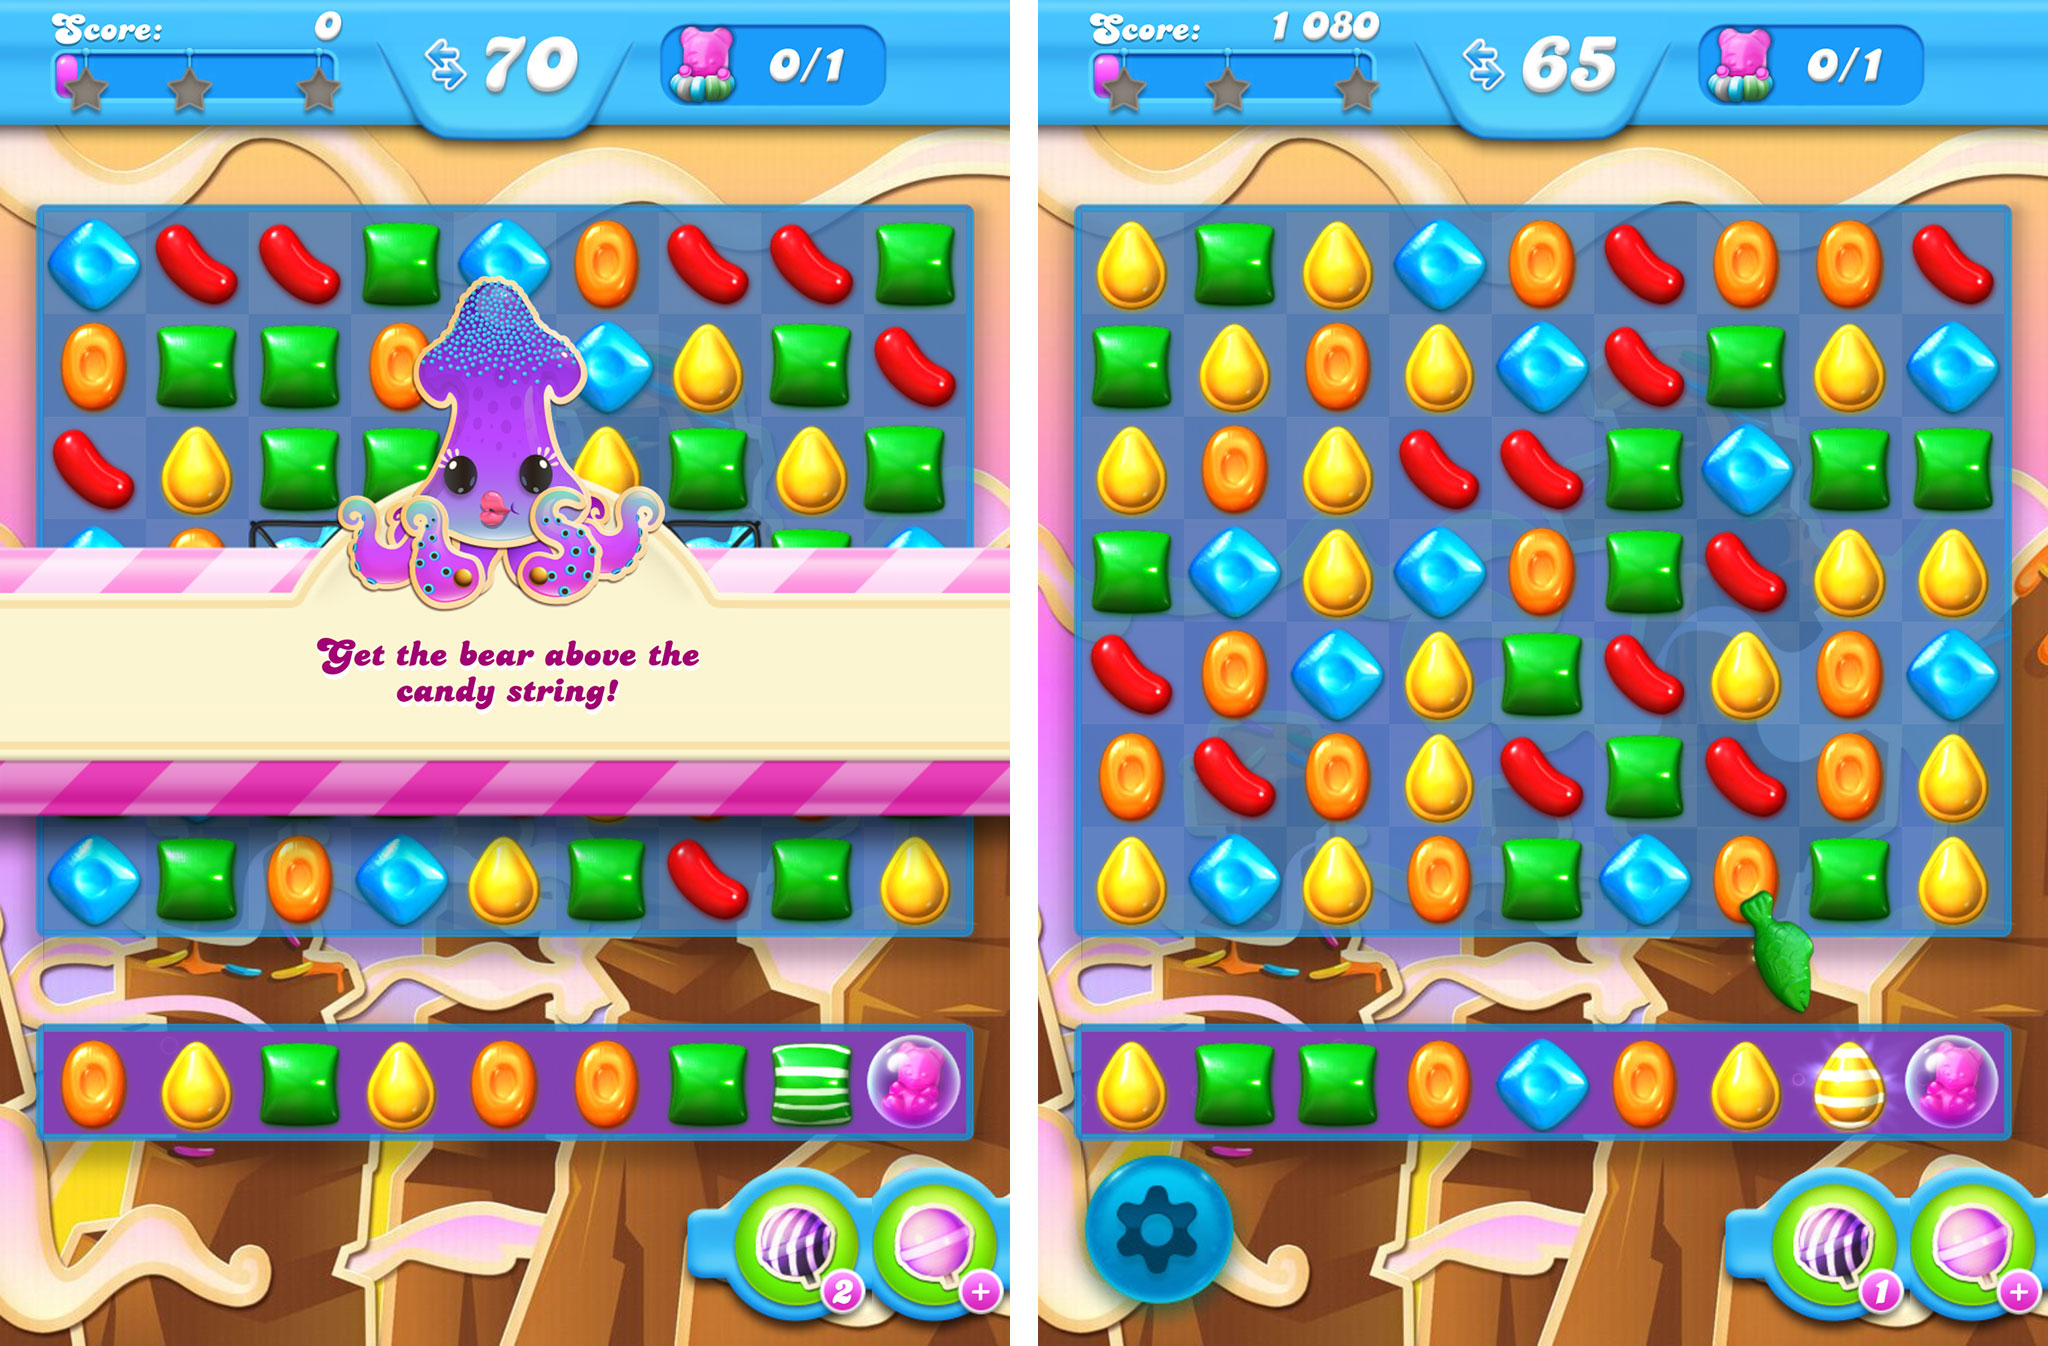 Candy Crush Soda Saga: How to beat levels 40, 52, 60, 70, and 72 | iMore How To Beat Level 72 On Candy Crush